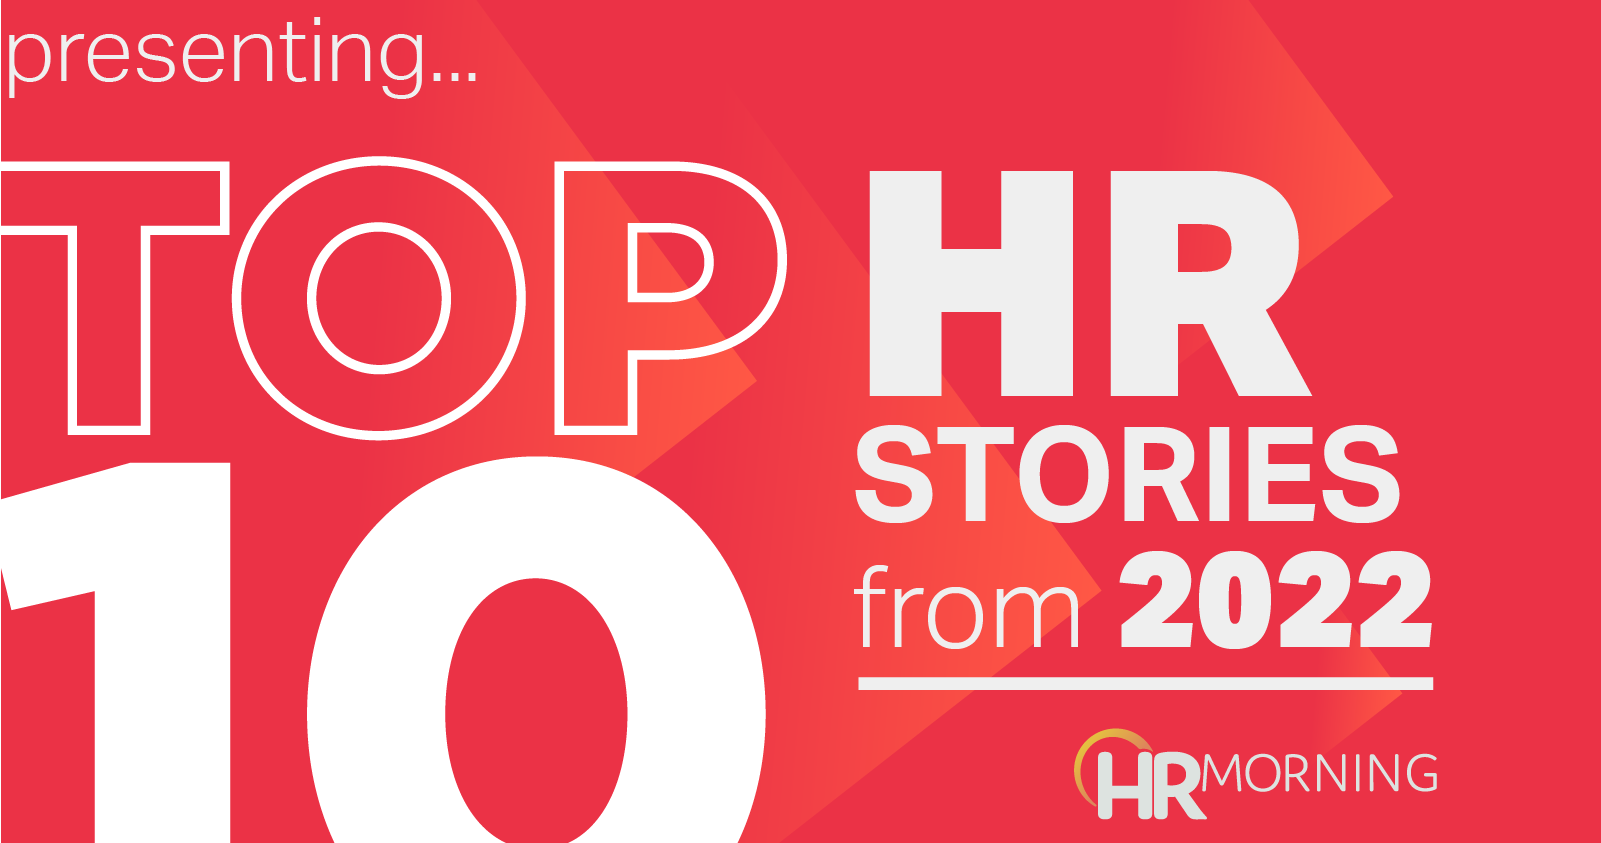 Presenting the Top 10 HR stories of 2022